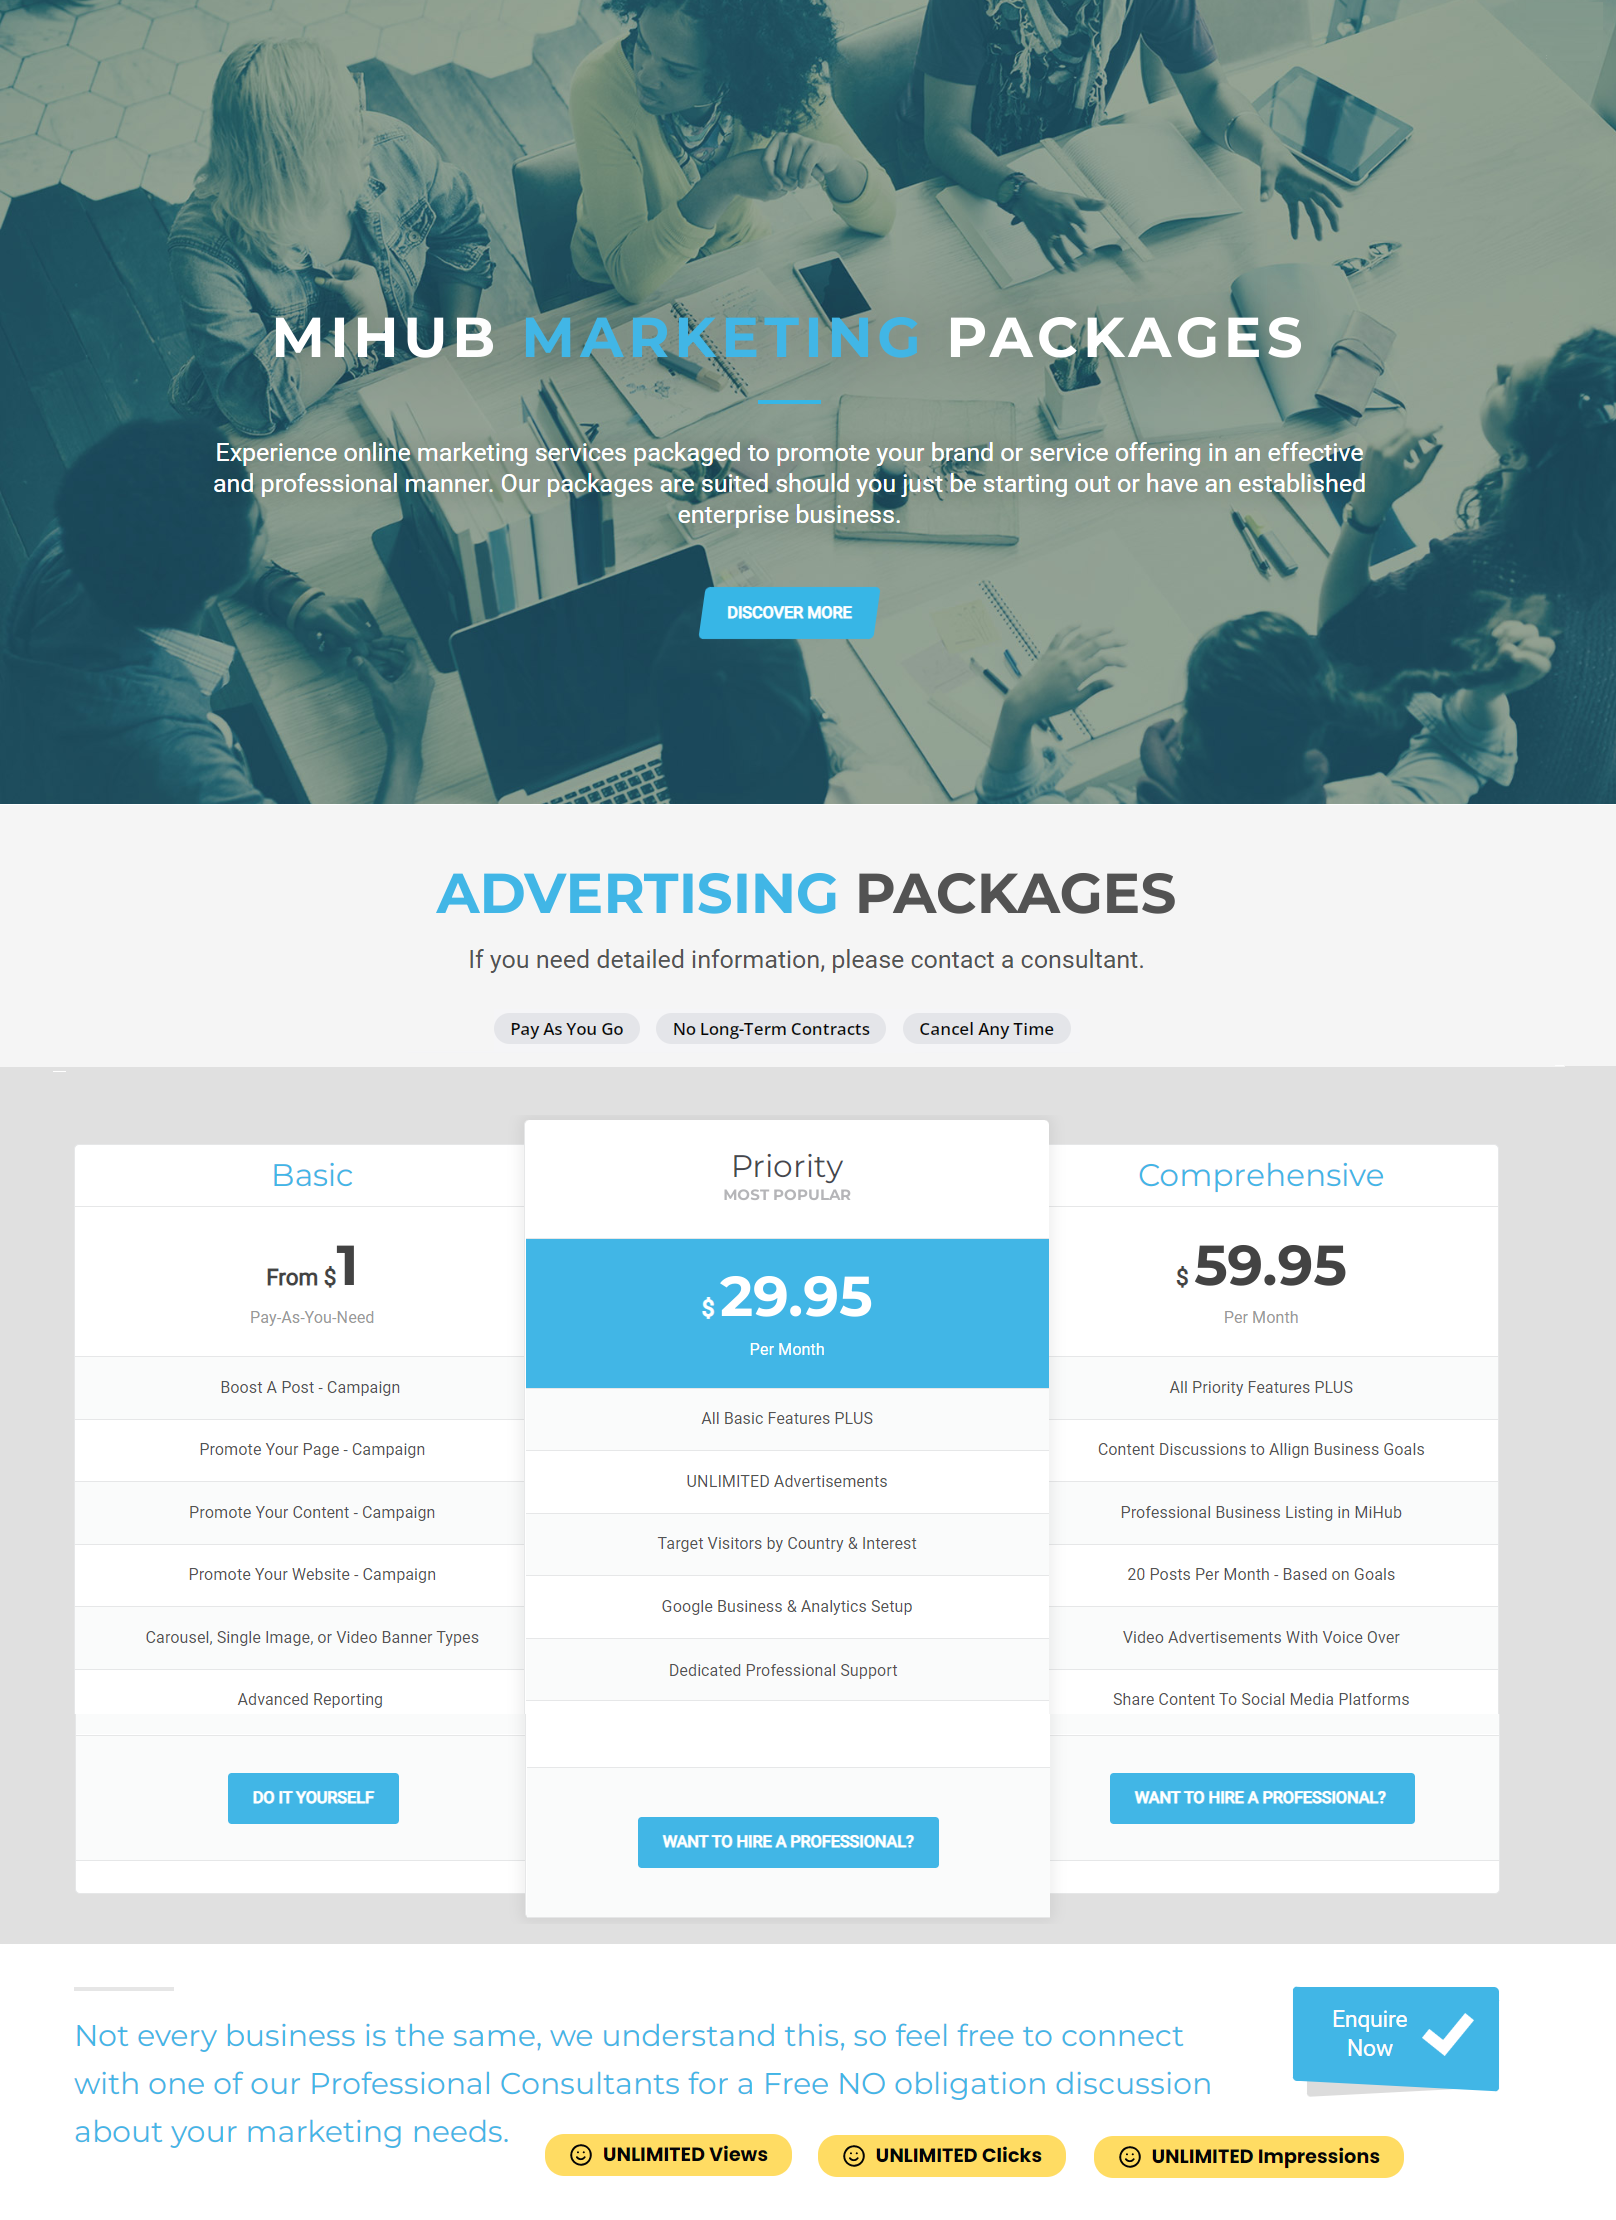 Advertisin Packages